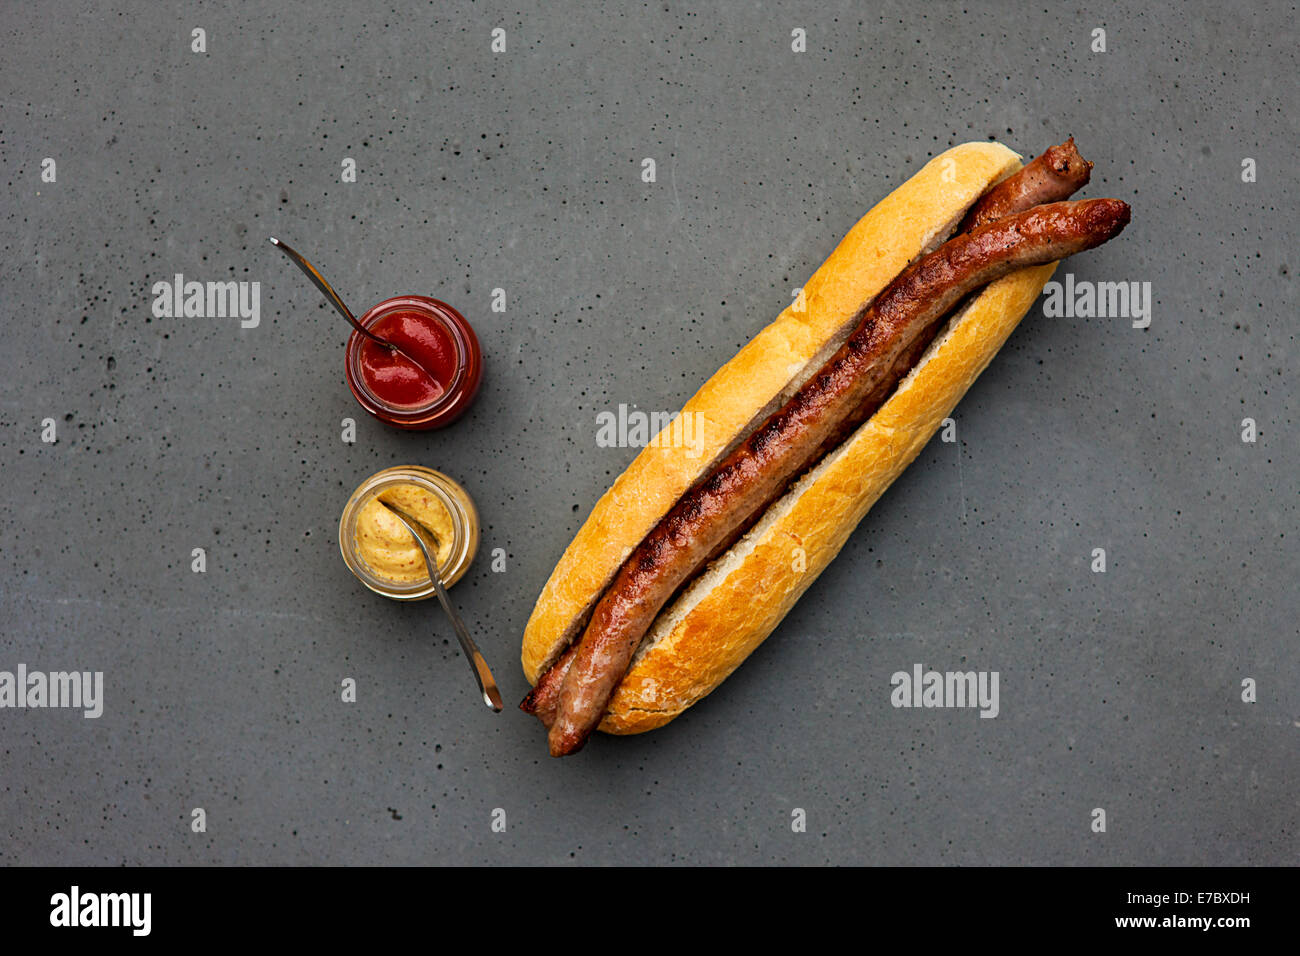 Modern classical hot dog with lamb sausage, bun, ketchup, mustard on concrete table Stock Photo